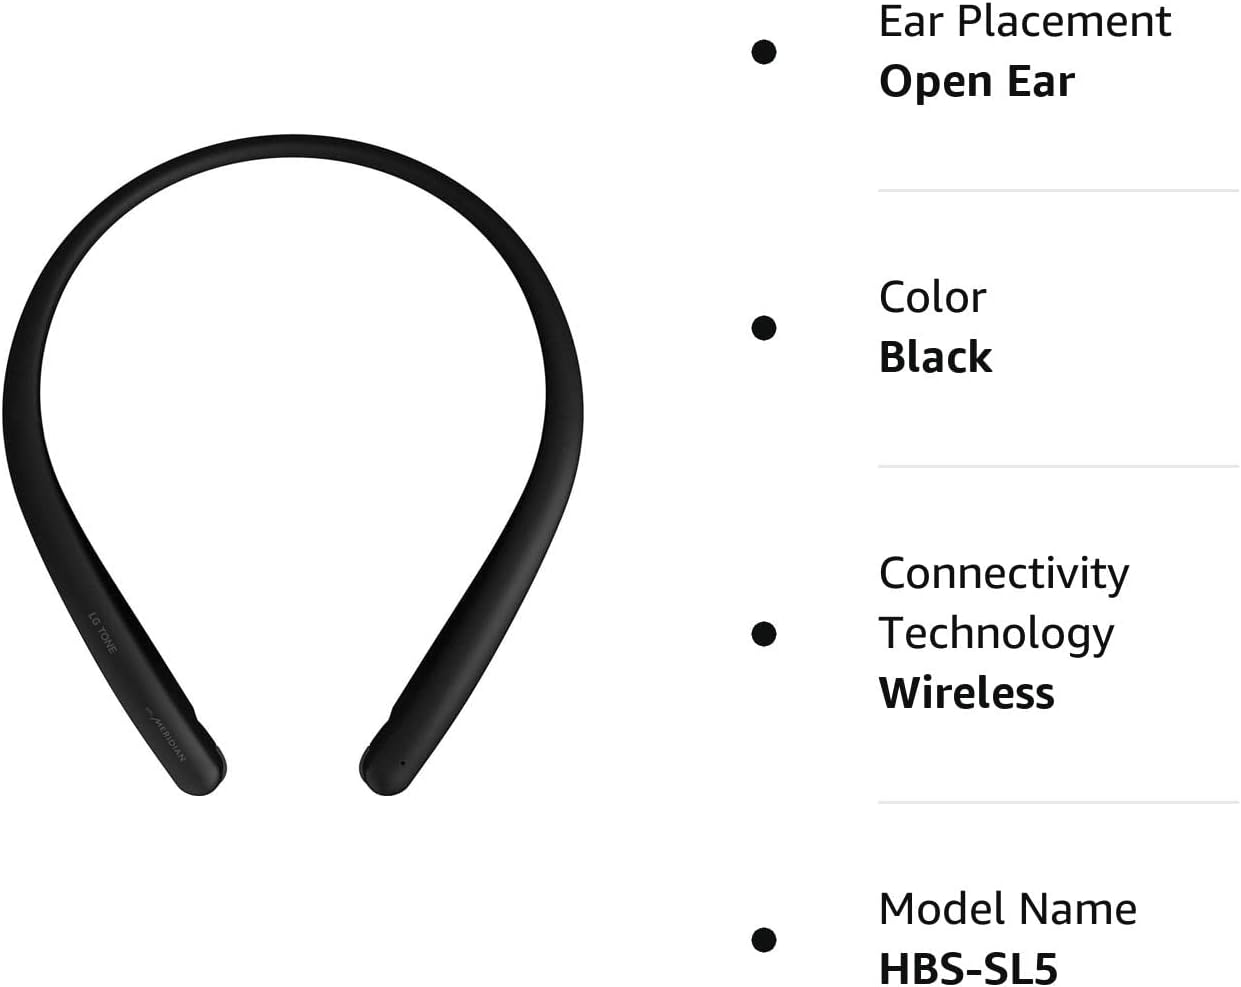 Perspective: LG Tone Style HBS-SL5 Bluetooth Wireless Stereo Neckband Earbuds Tuned by Meridian Audio,Black, 2.3